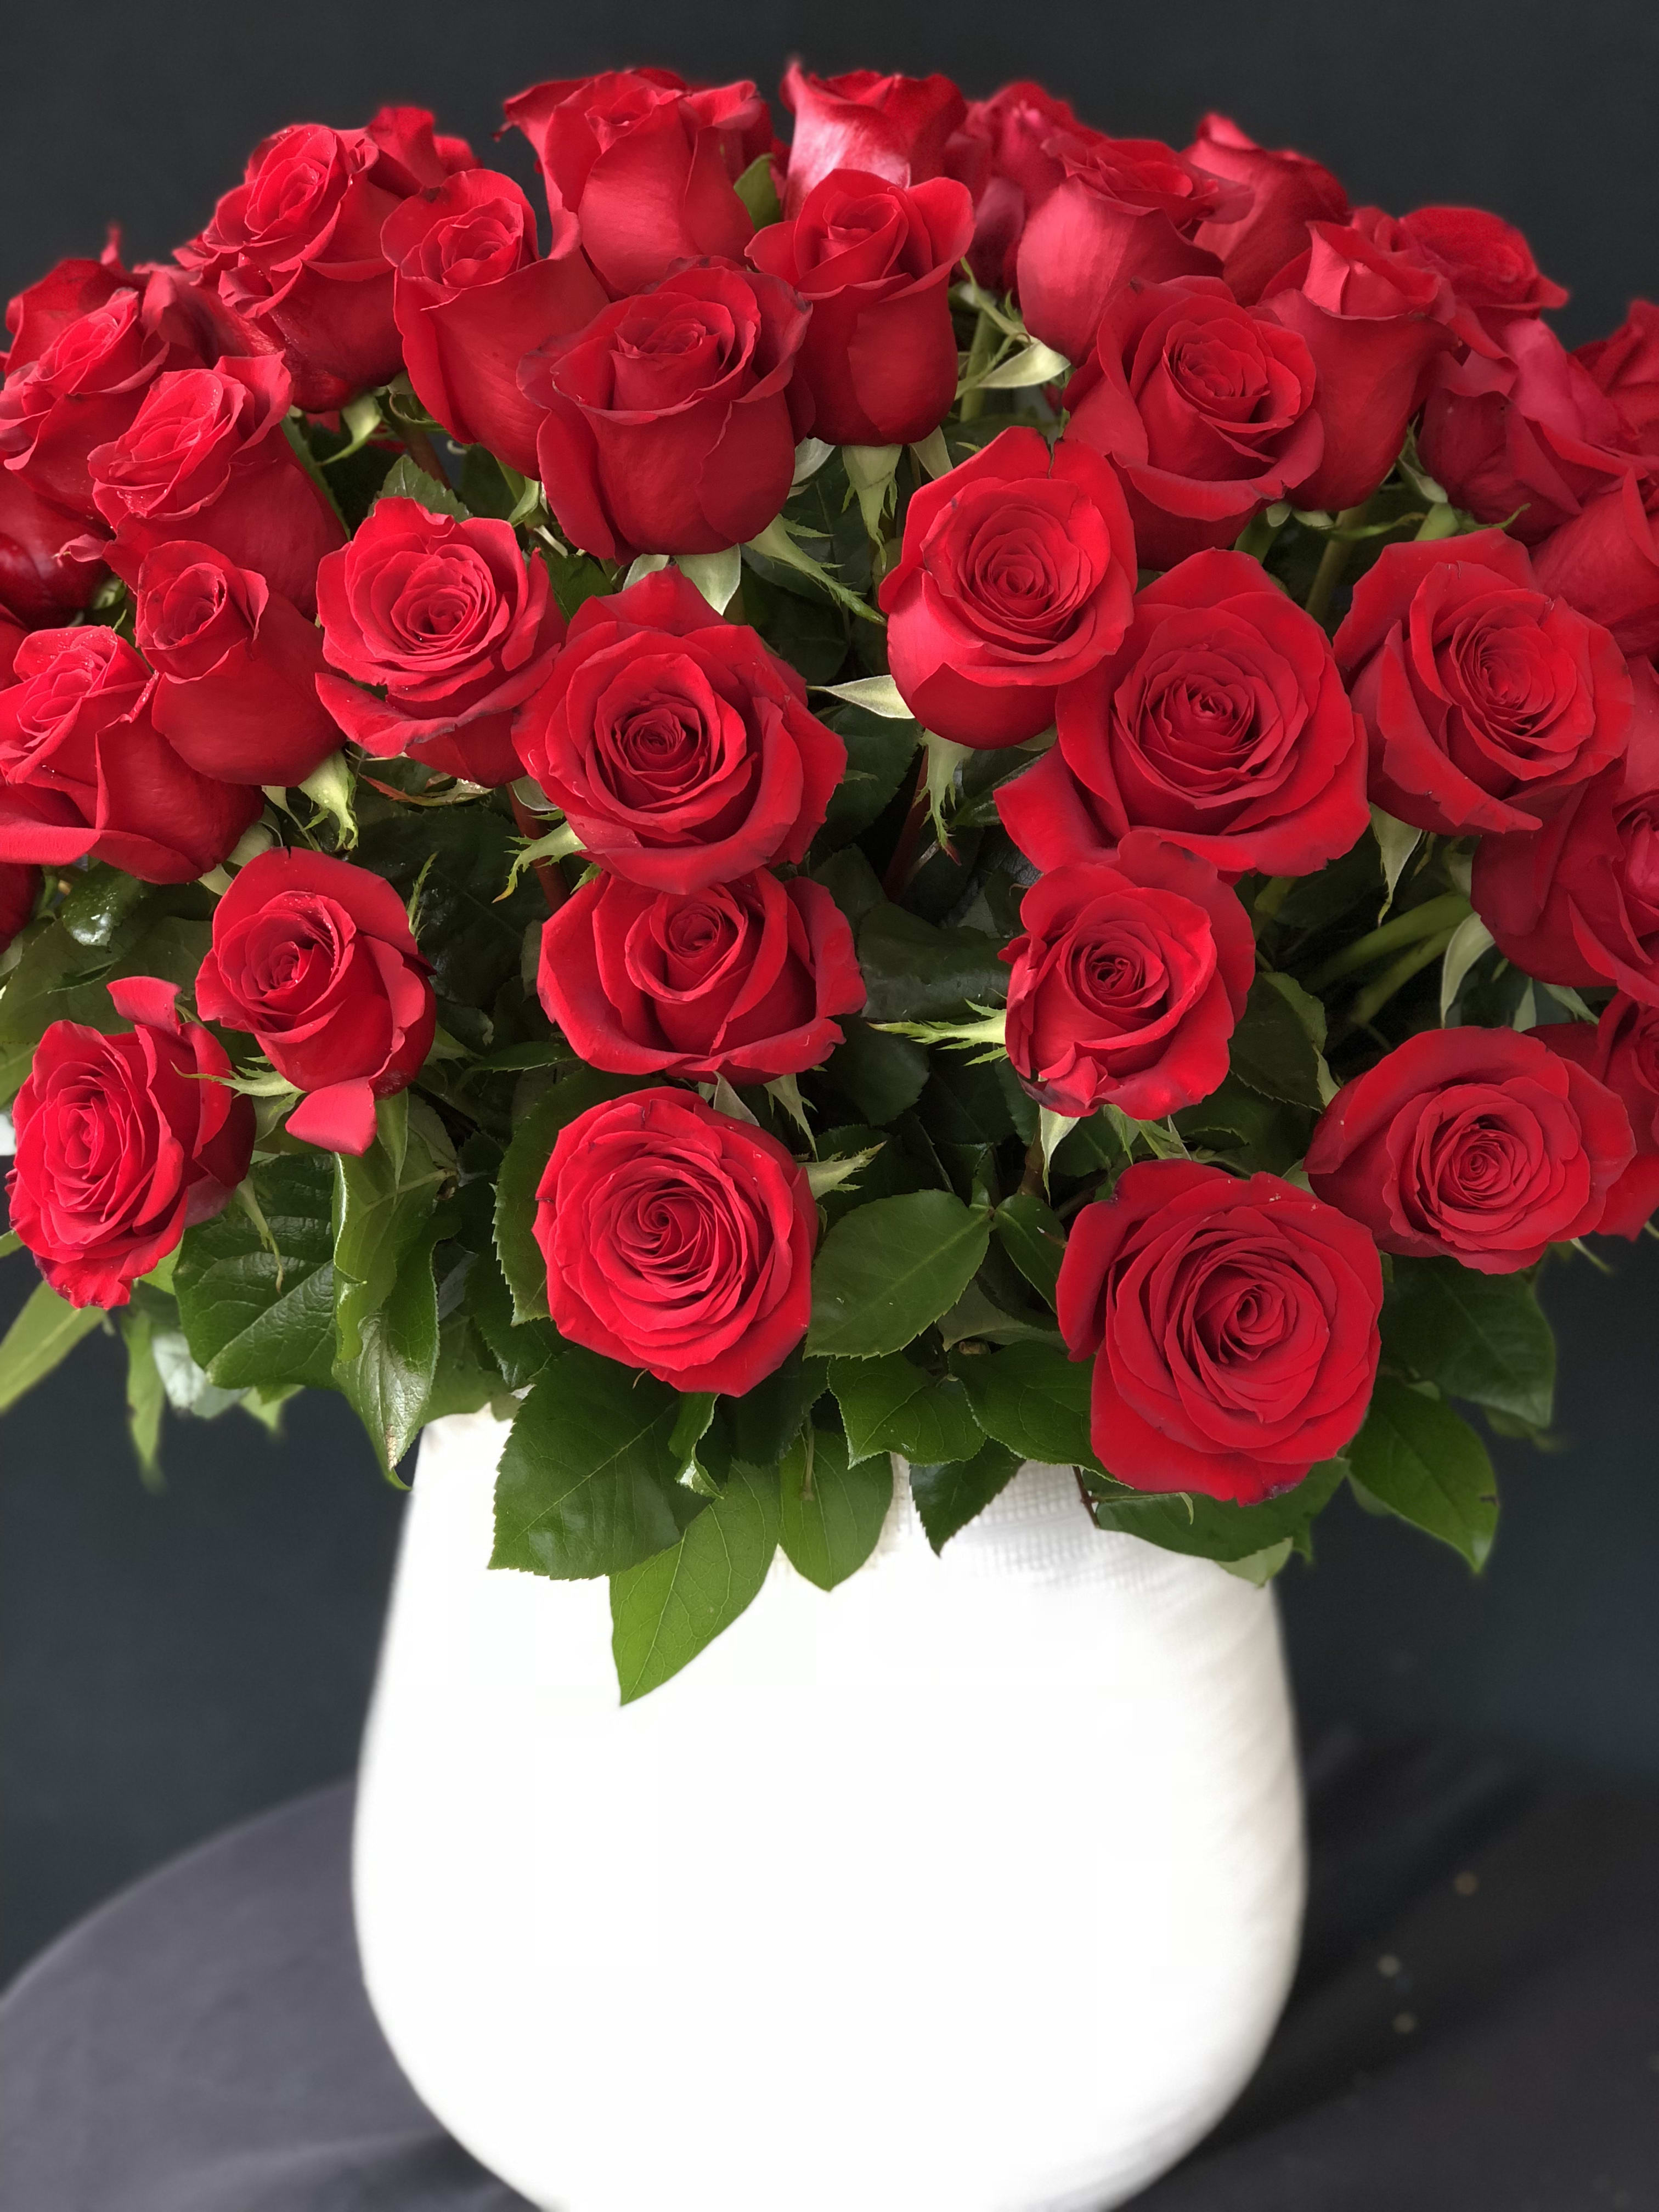 Ruby - 5 dozen amazing red Ecuadorian Roses in a ceramic container at medium height.  ****1 day advanced notice requested**** ***for a different color Roses arrangements please call us to place the order***